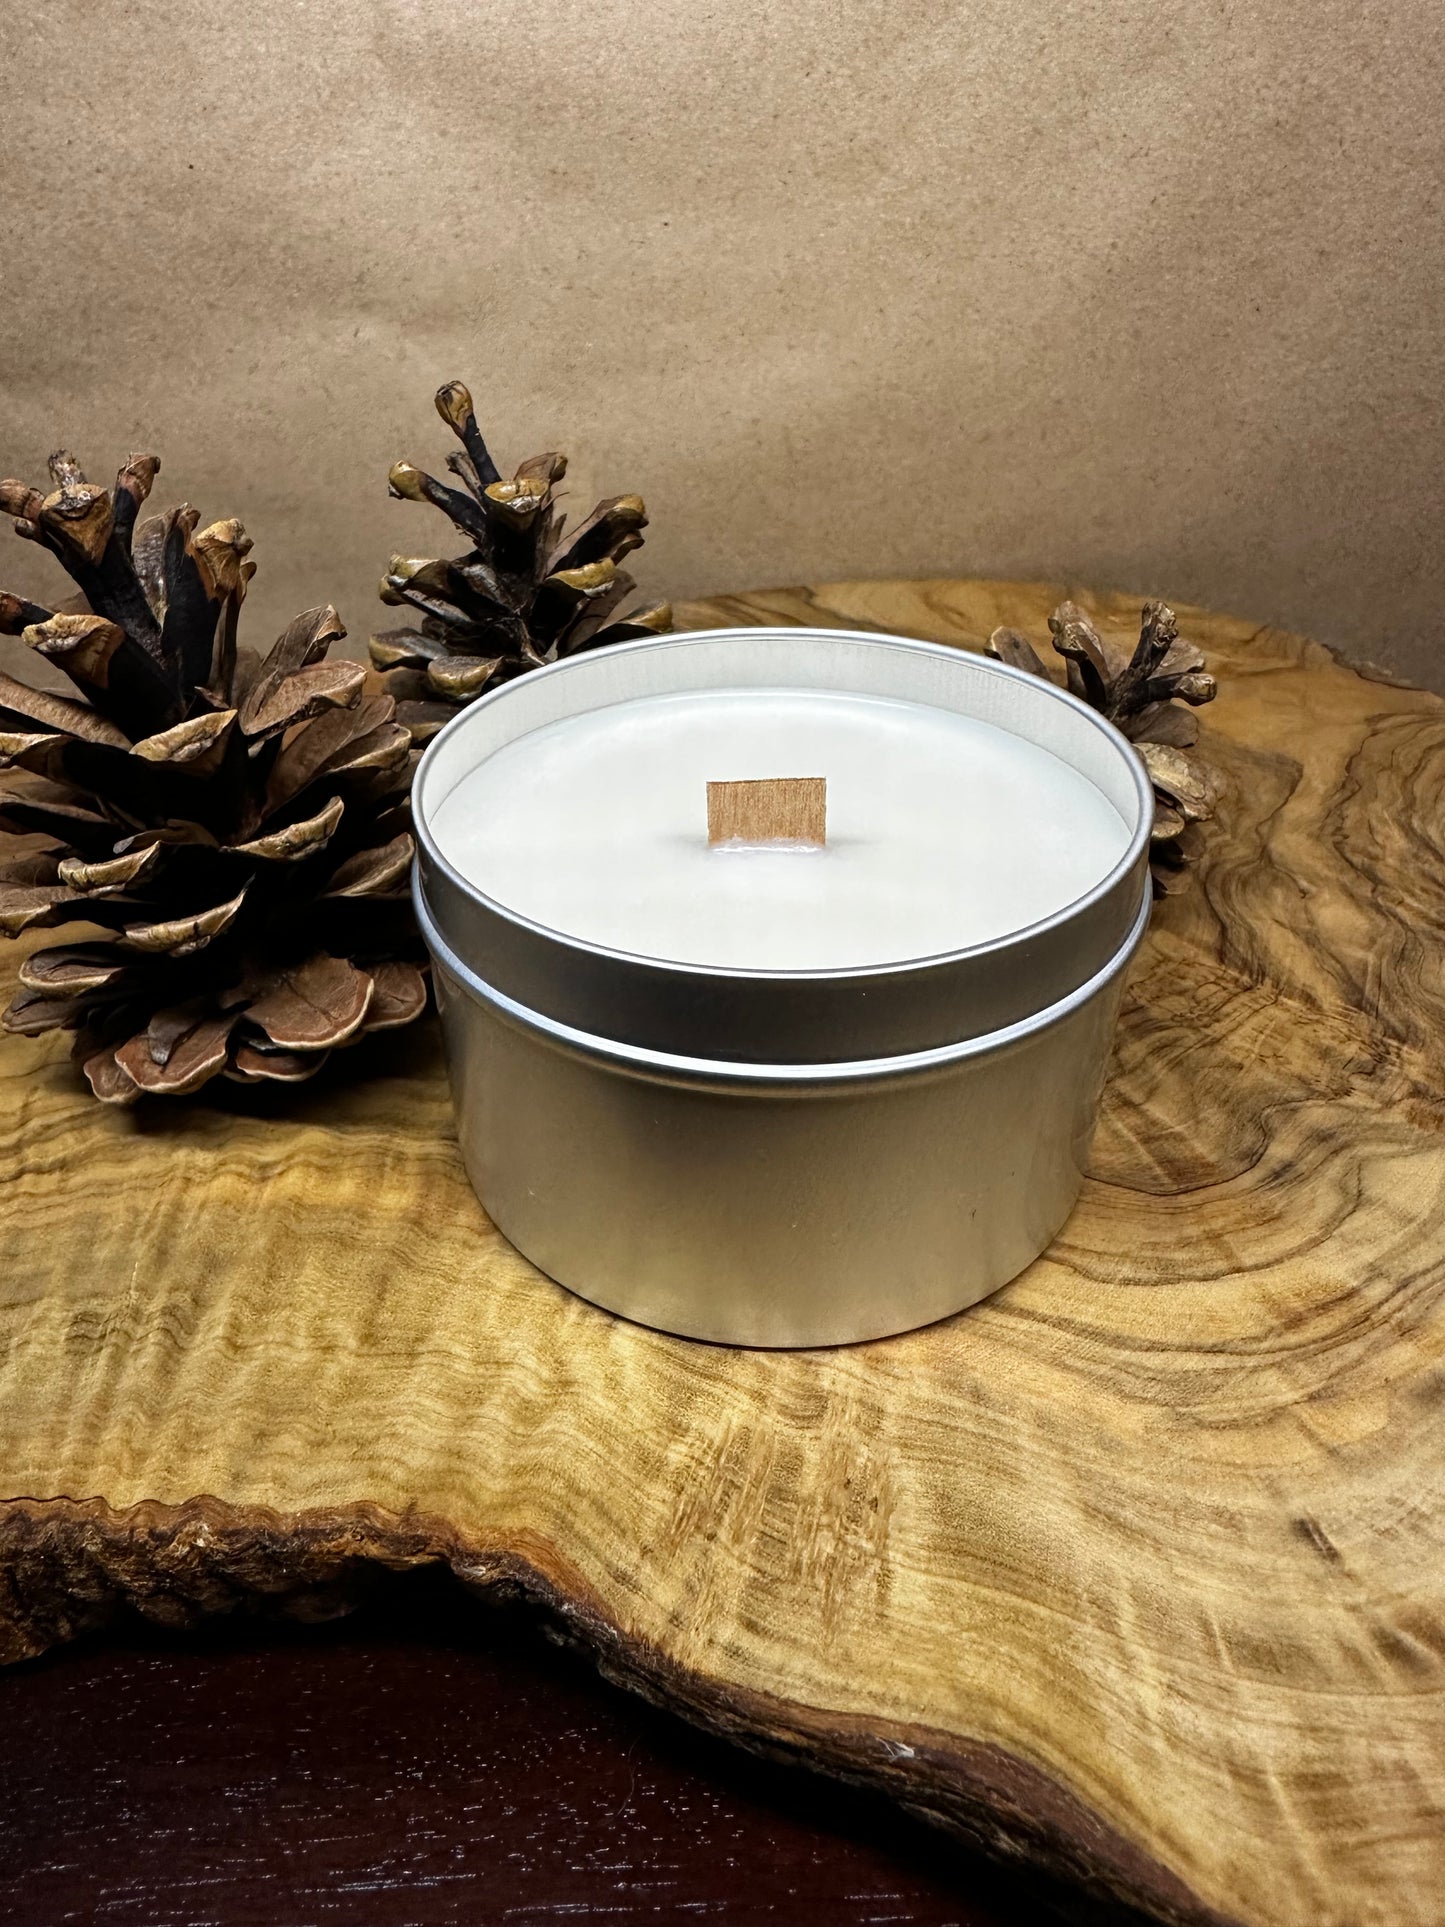 Skagit Wild Peppermint, Pine and Clove 8oz. Candle